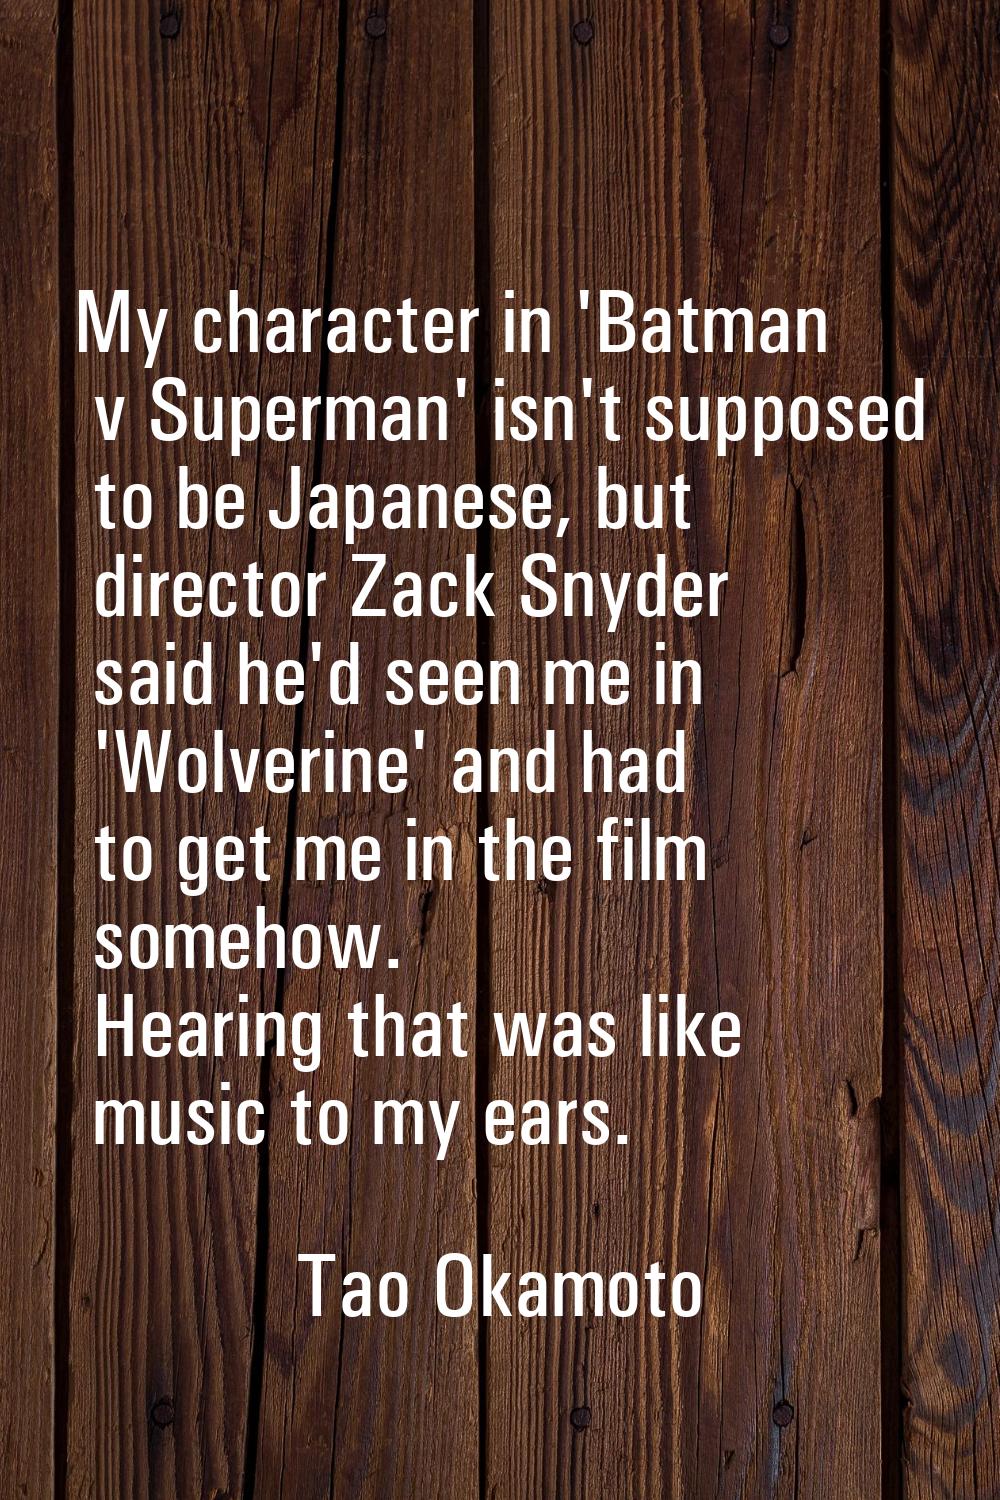 My character in 'Batman v Superman' isn't supposed to be Japanese, but director Zack Snyder said he